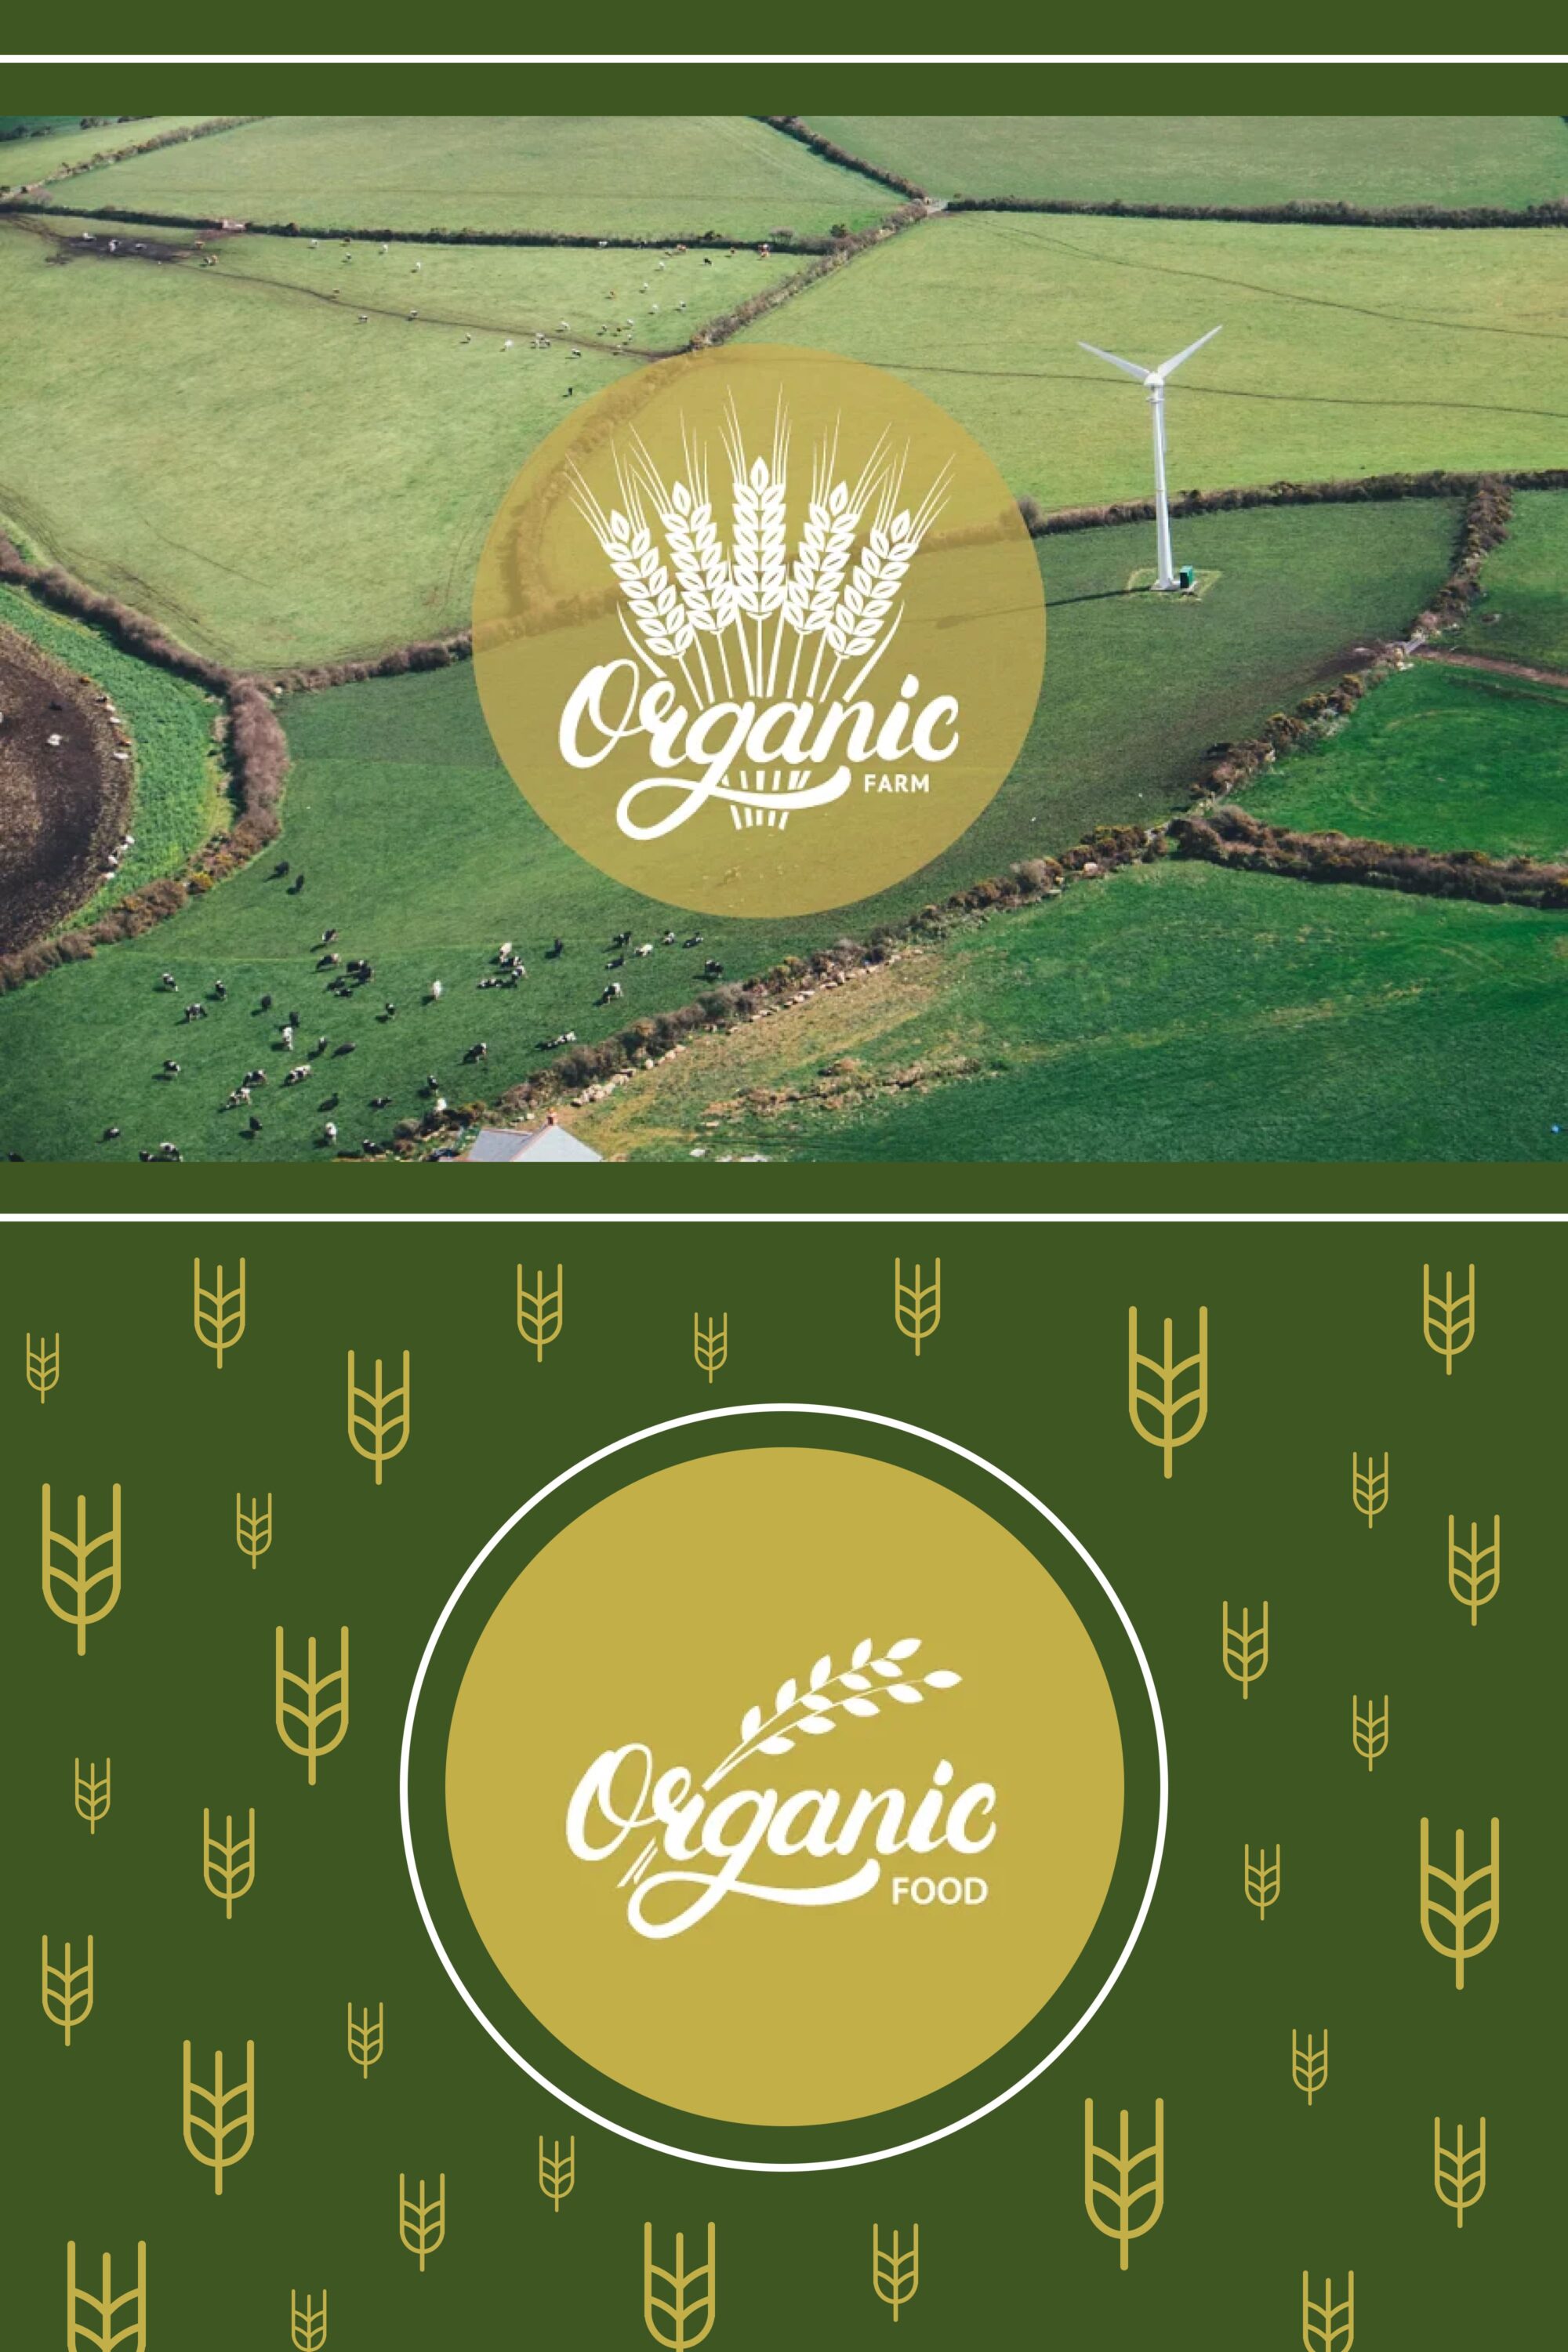 Such a beautiful green logo for organic products.